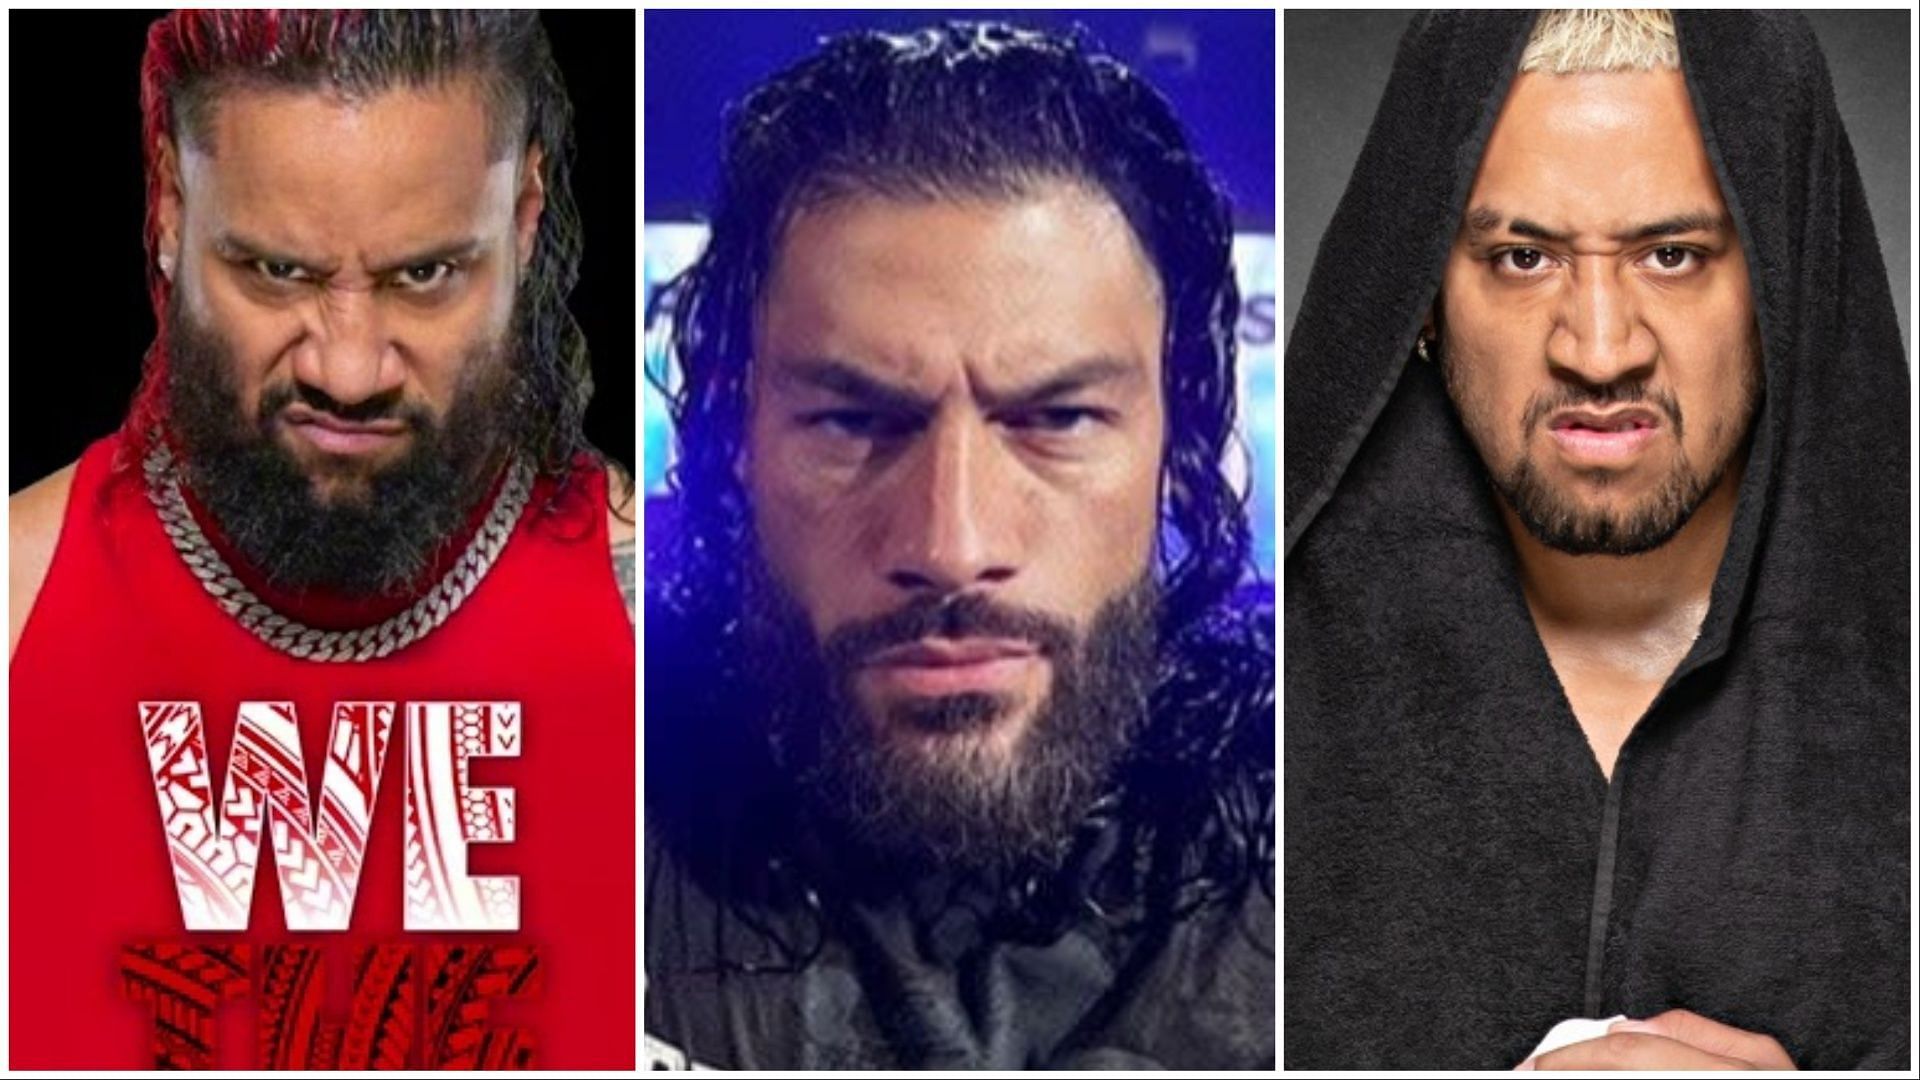 Current members of The Bloodline: Jimmy Uso, Roman Reigns, and Solo Sikoa